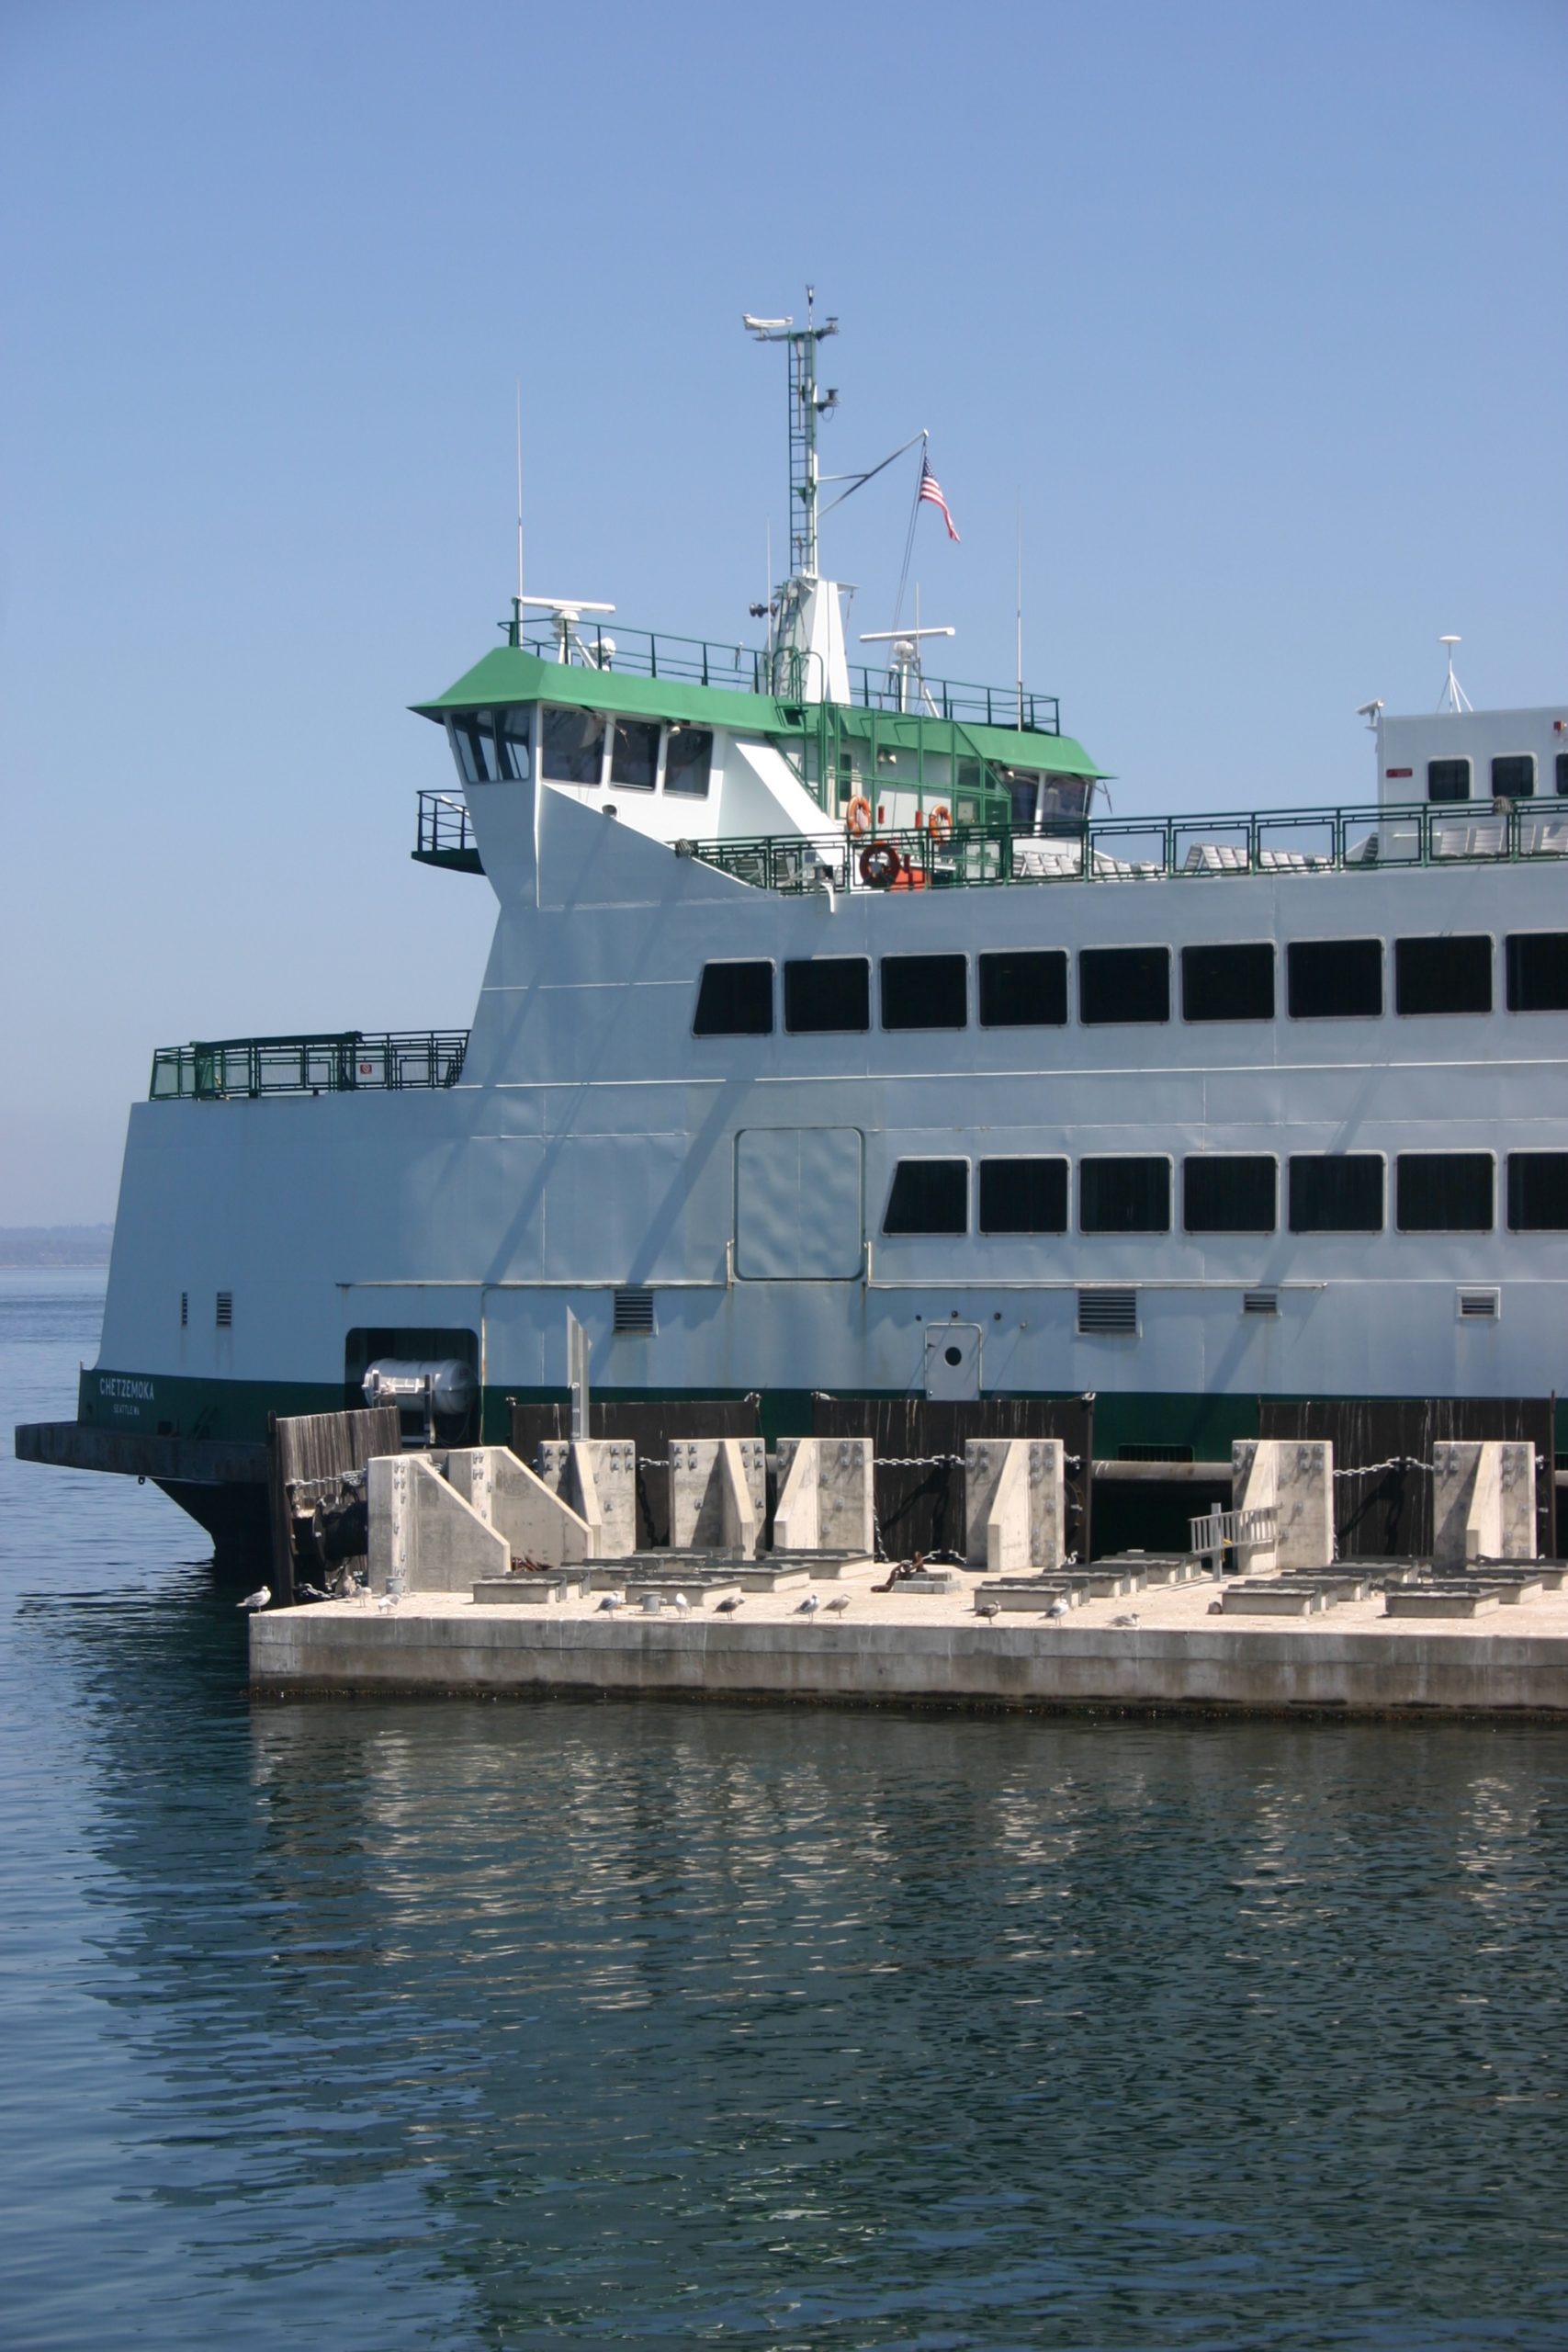 Washington State ferry Chetzemoka at the Point Defiance dock in Tacoma. Credit: David Guest / TDI